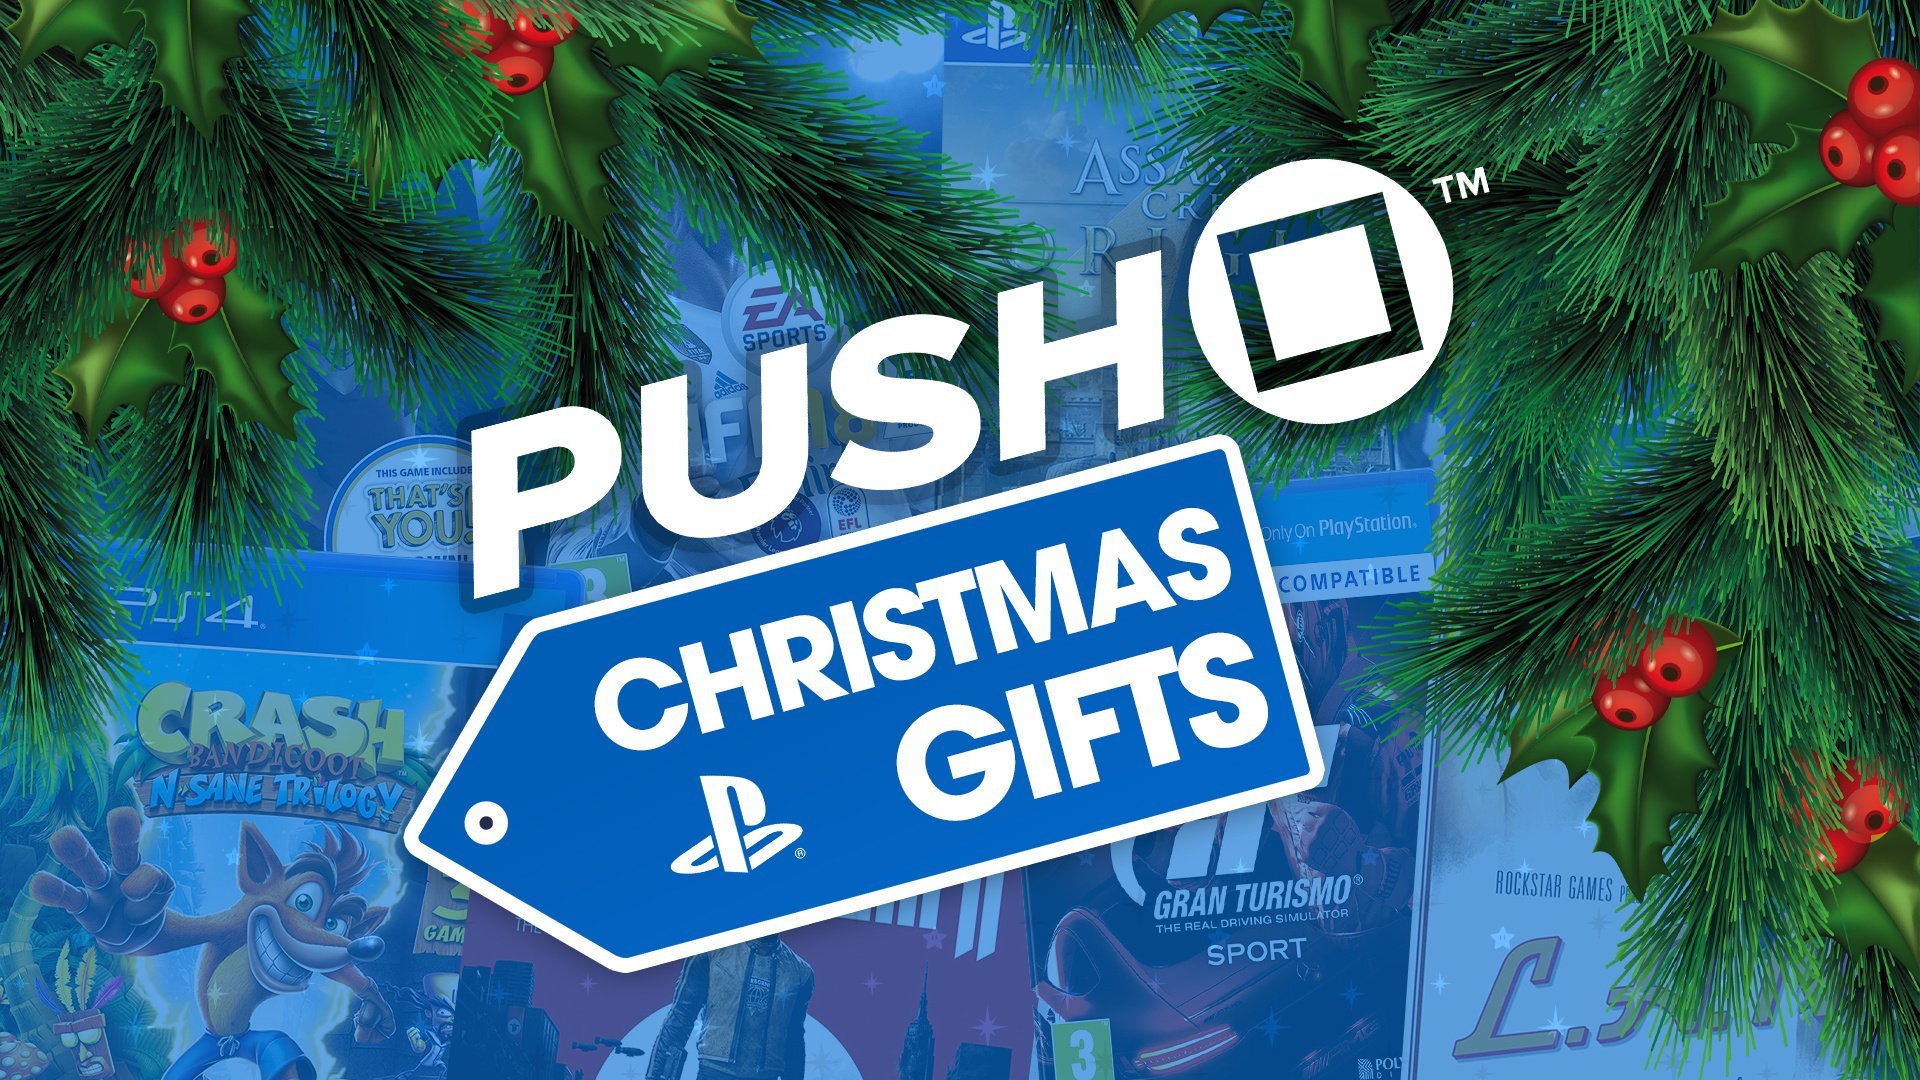 ps4 gift ideas 2019